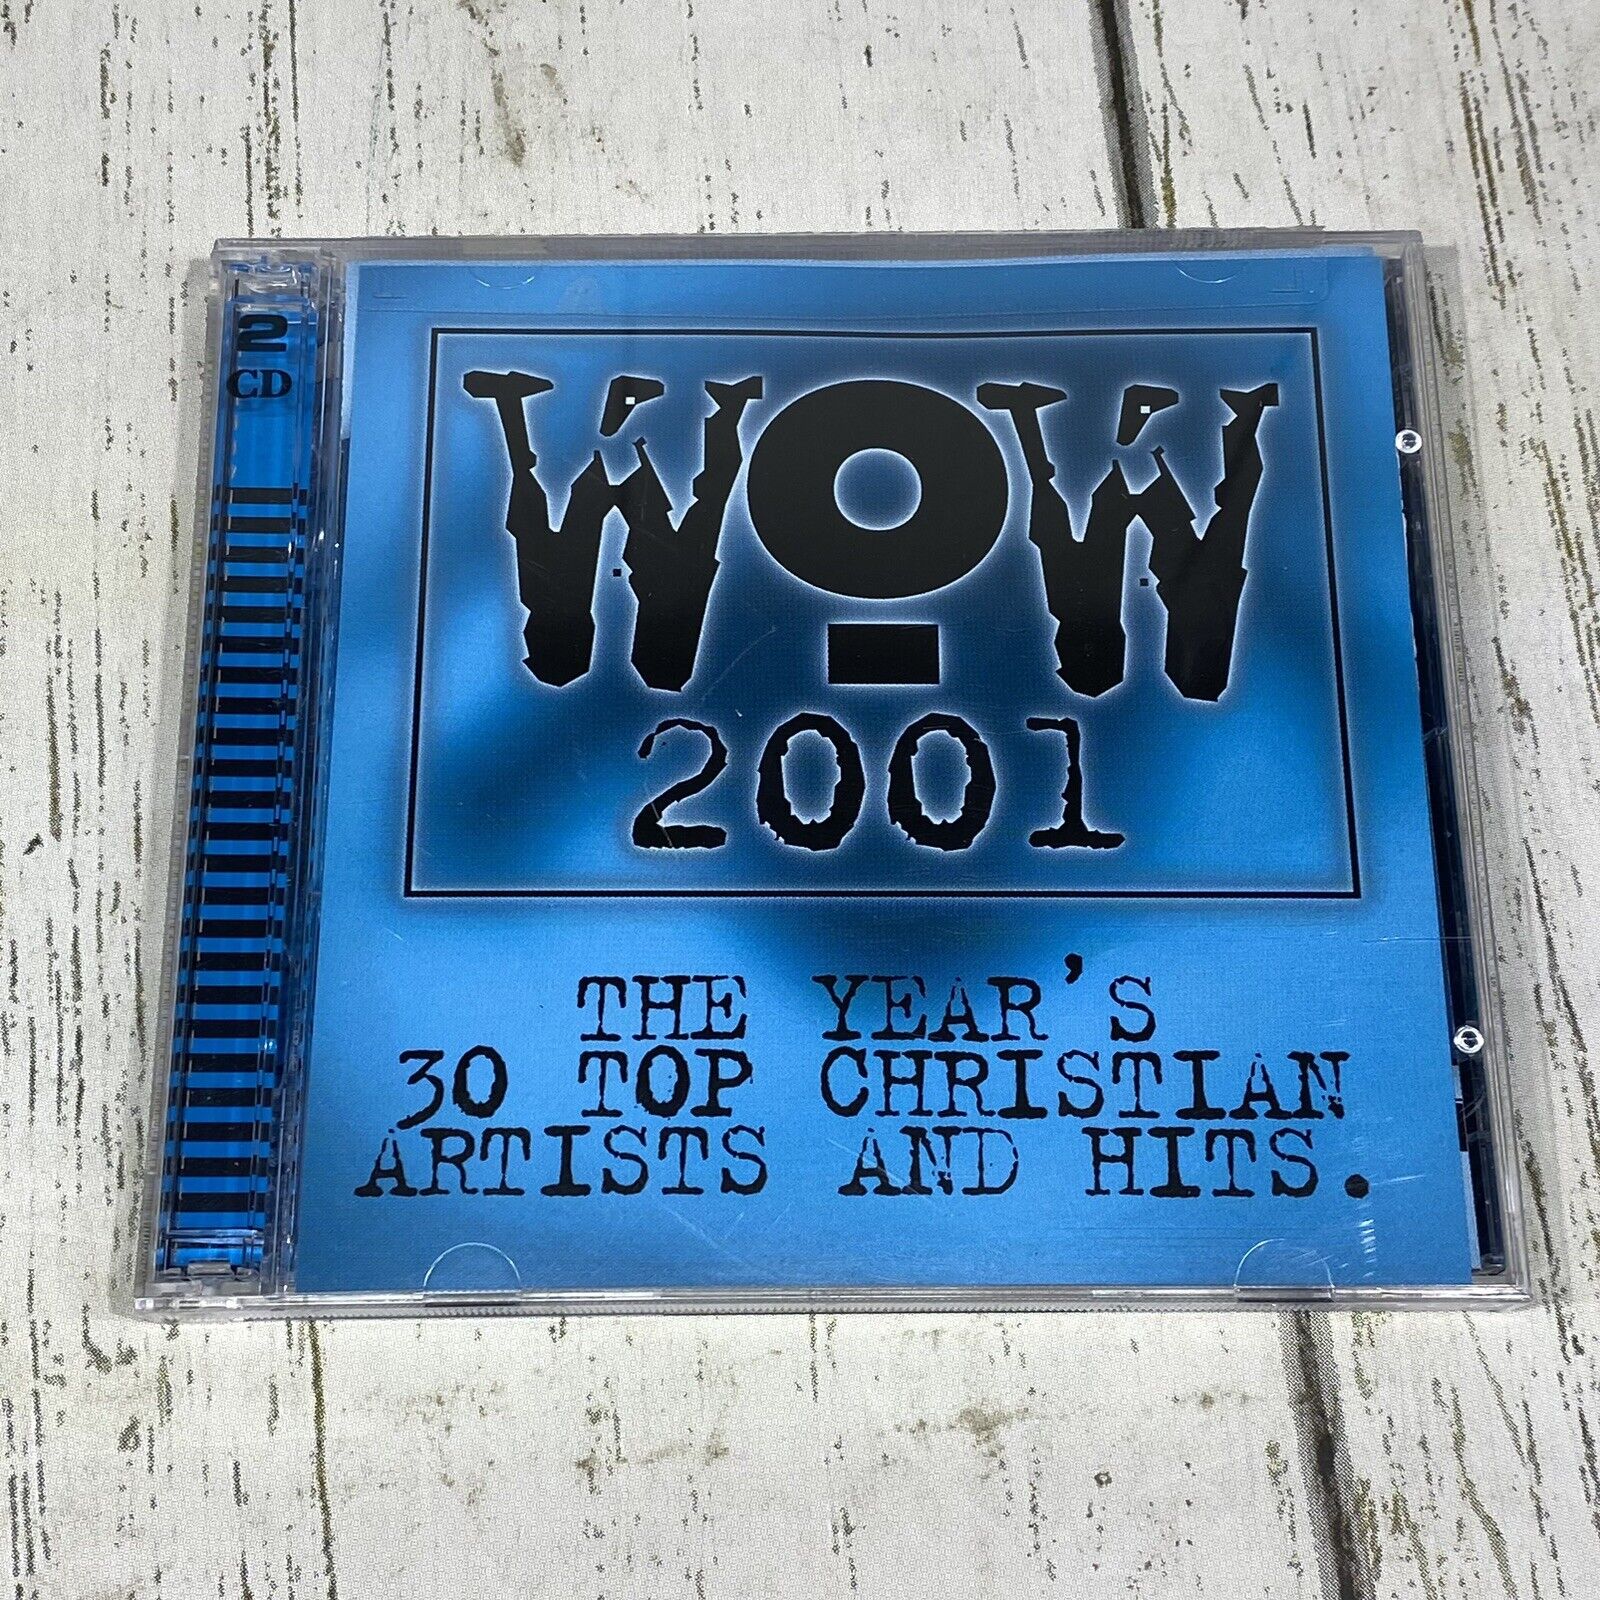 WOW 2001 by Various Artists (CD, Oct-2000, 2 Discs, Sparrow Records) Brand New 